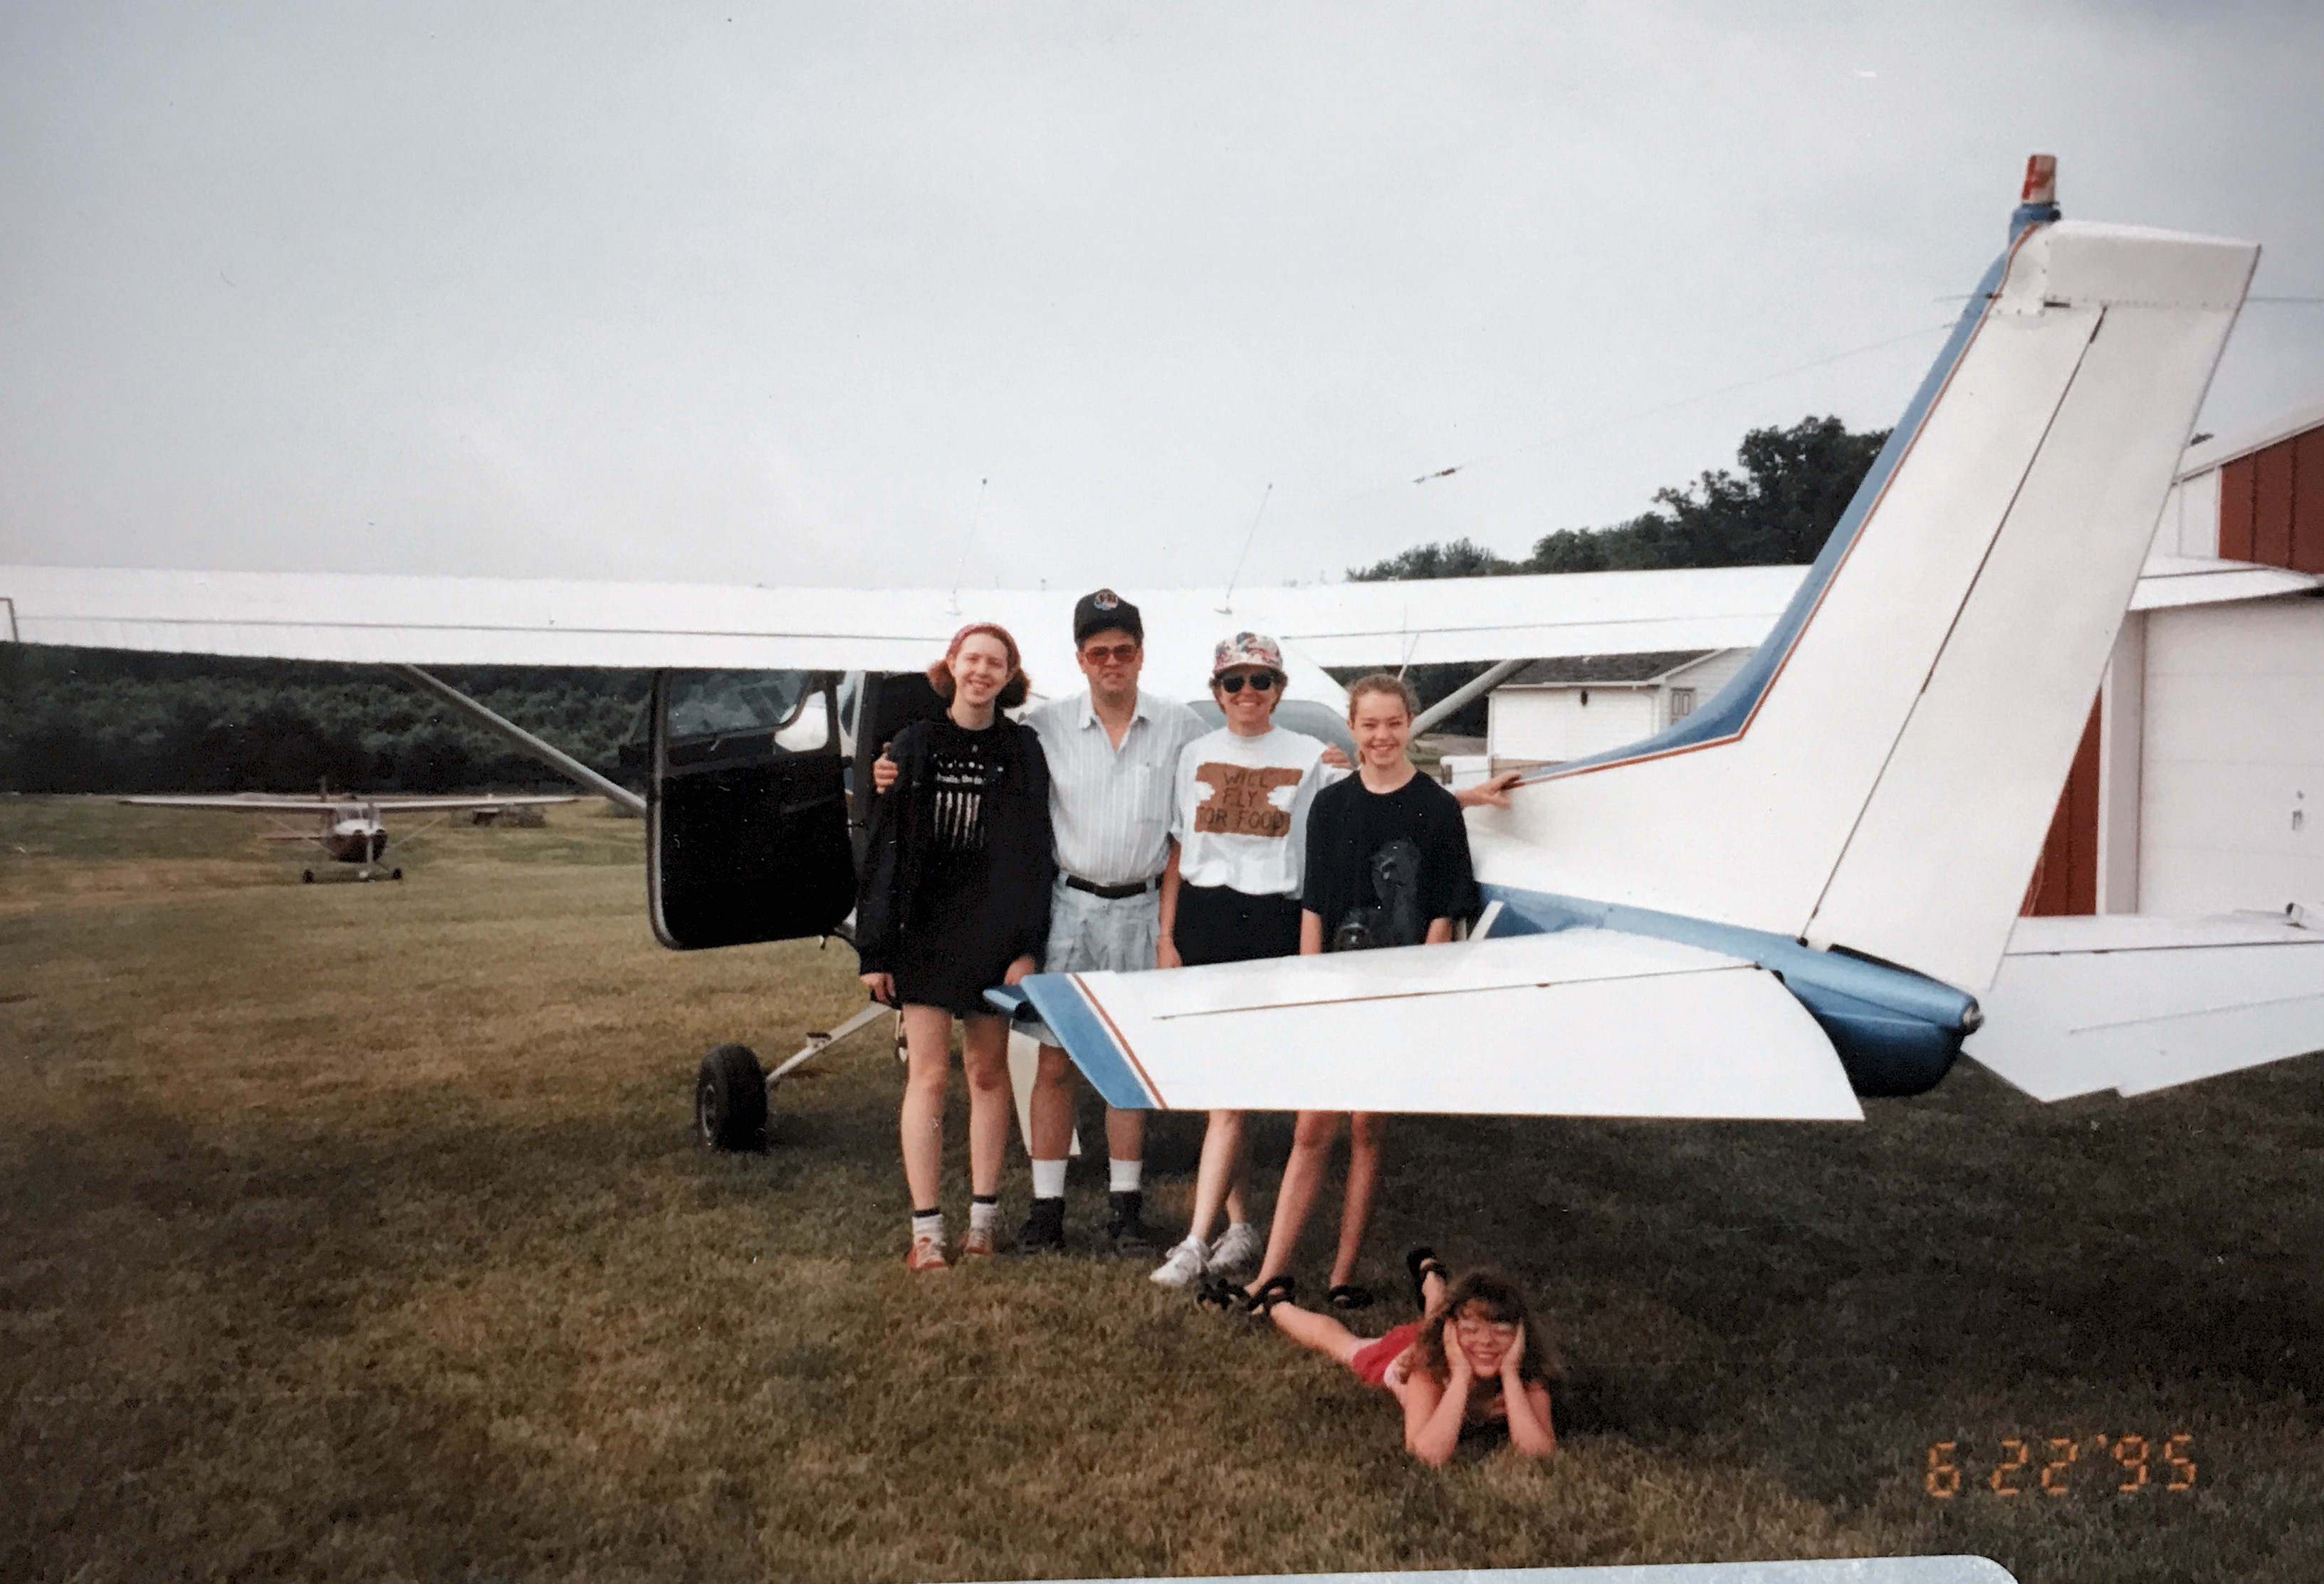 Taking off on June 22, 1995